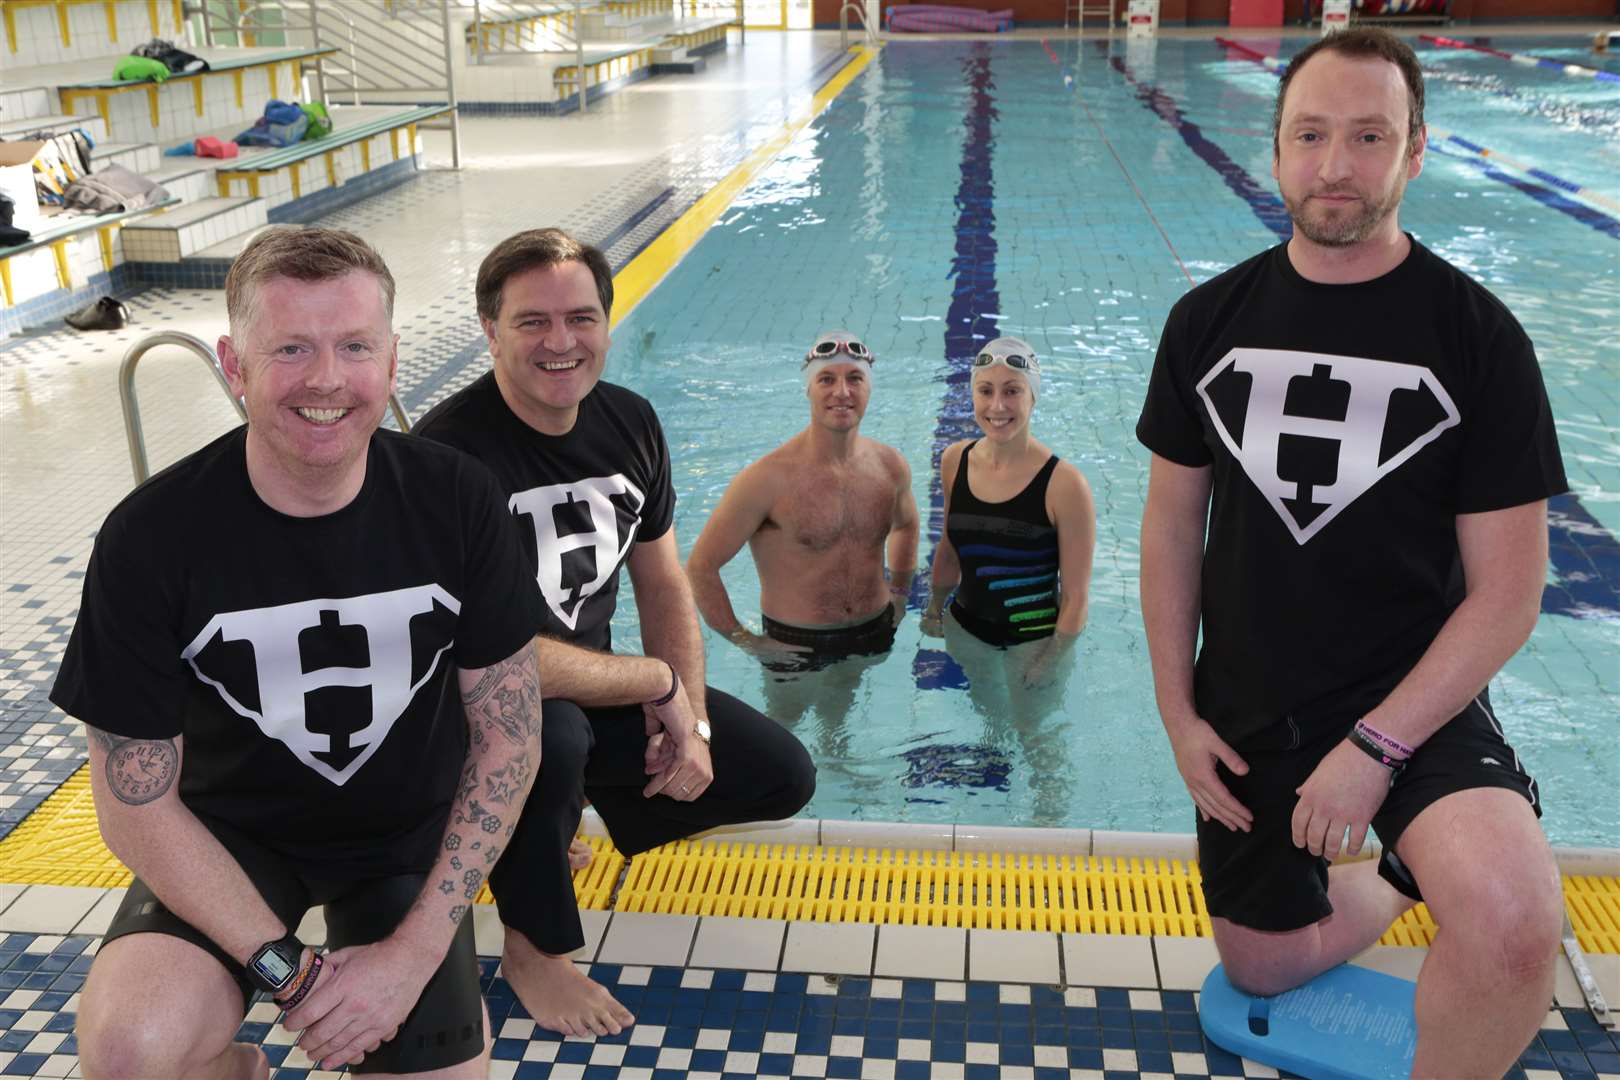 Hayley's Heroes took part in several endurance swims to raise money in her name